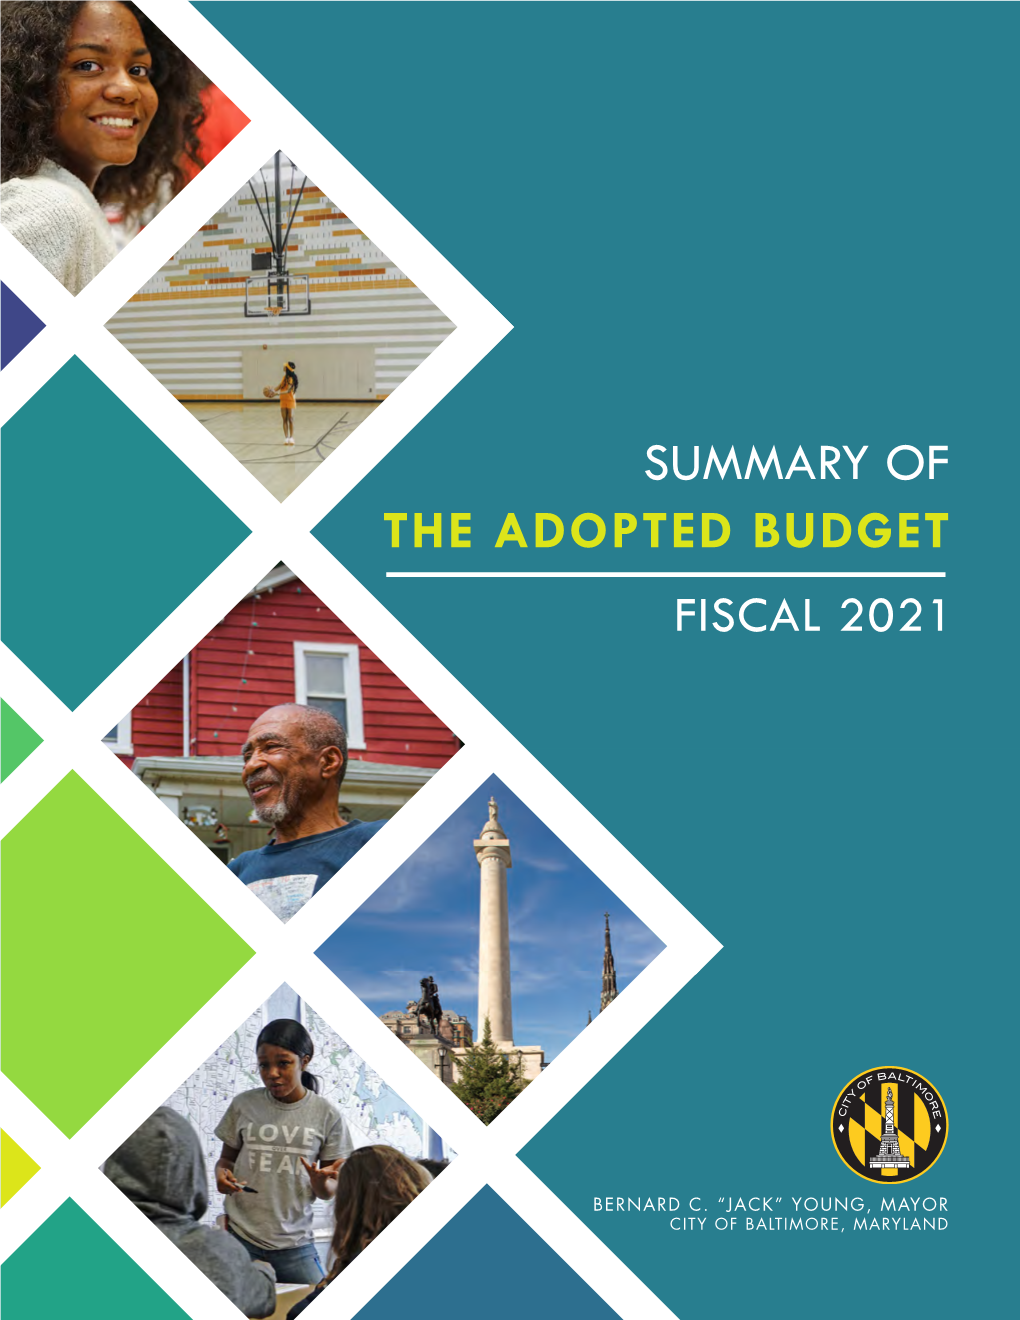 Fiscal 2021 Preliminary Budget Estimate, and $34.4 Million Lower Than the Fiscal 2020 Adopted Budgetof $2.0 Billion